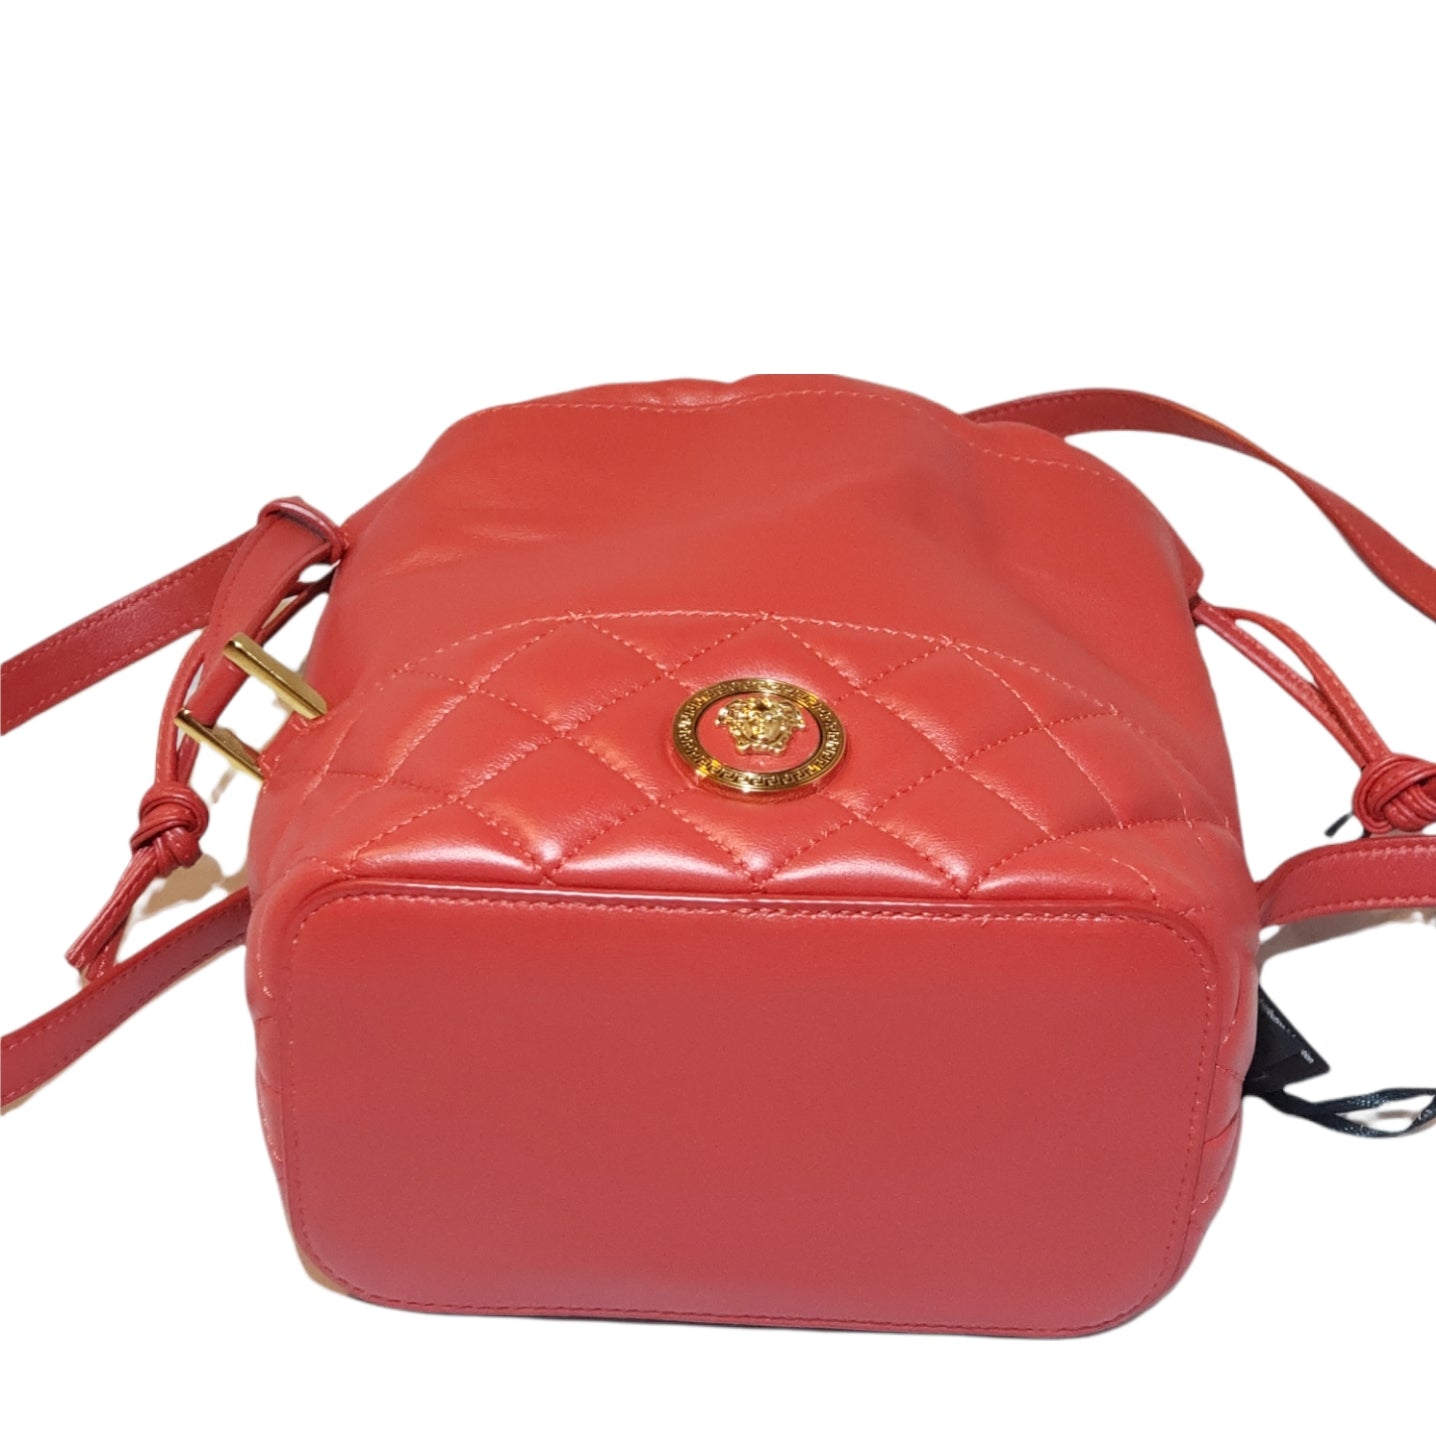 Cylindrical Bucket Leather Bag in Sangria Red